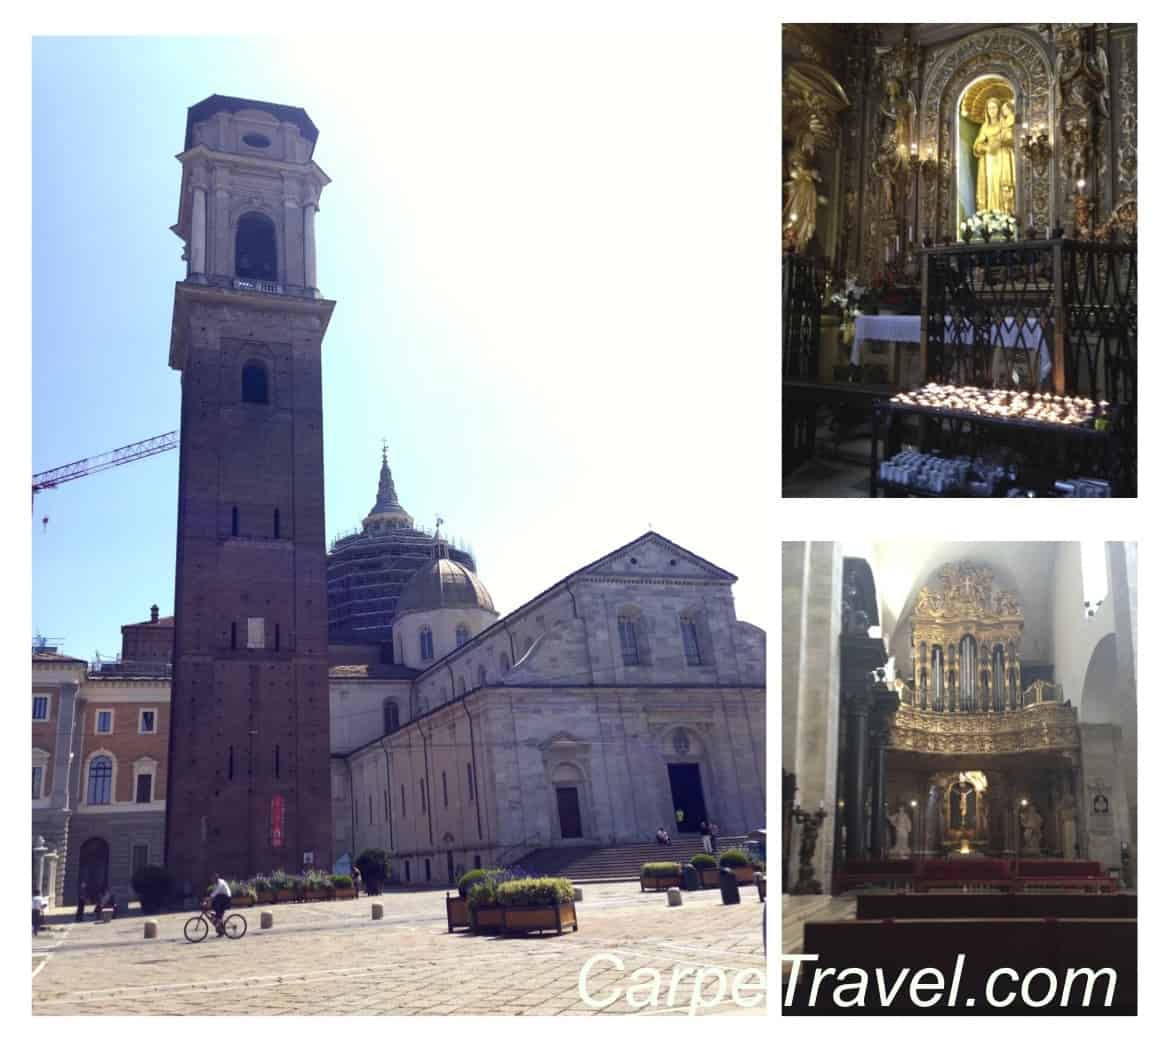 catherdal of turin - Things to do in Turin